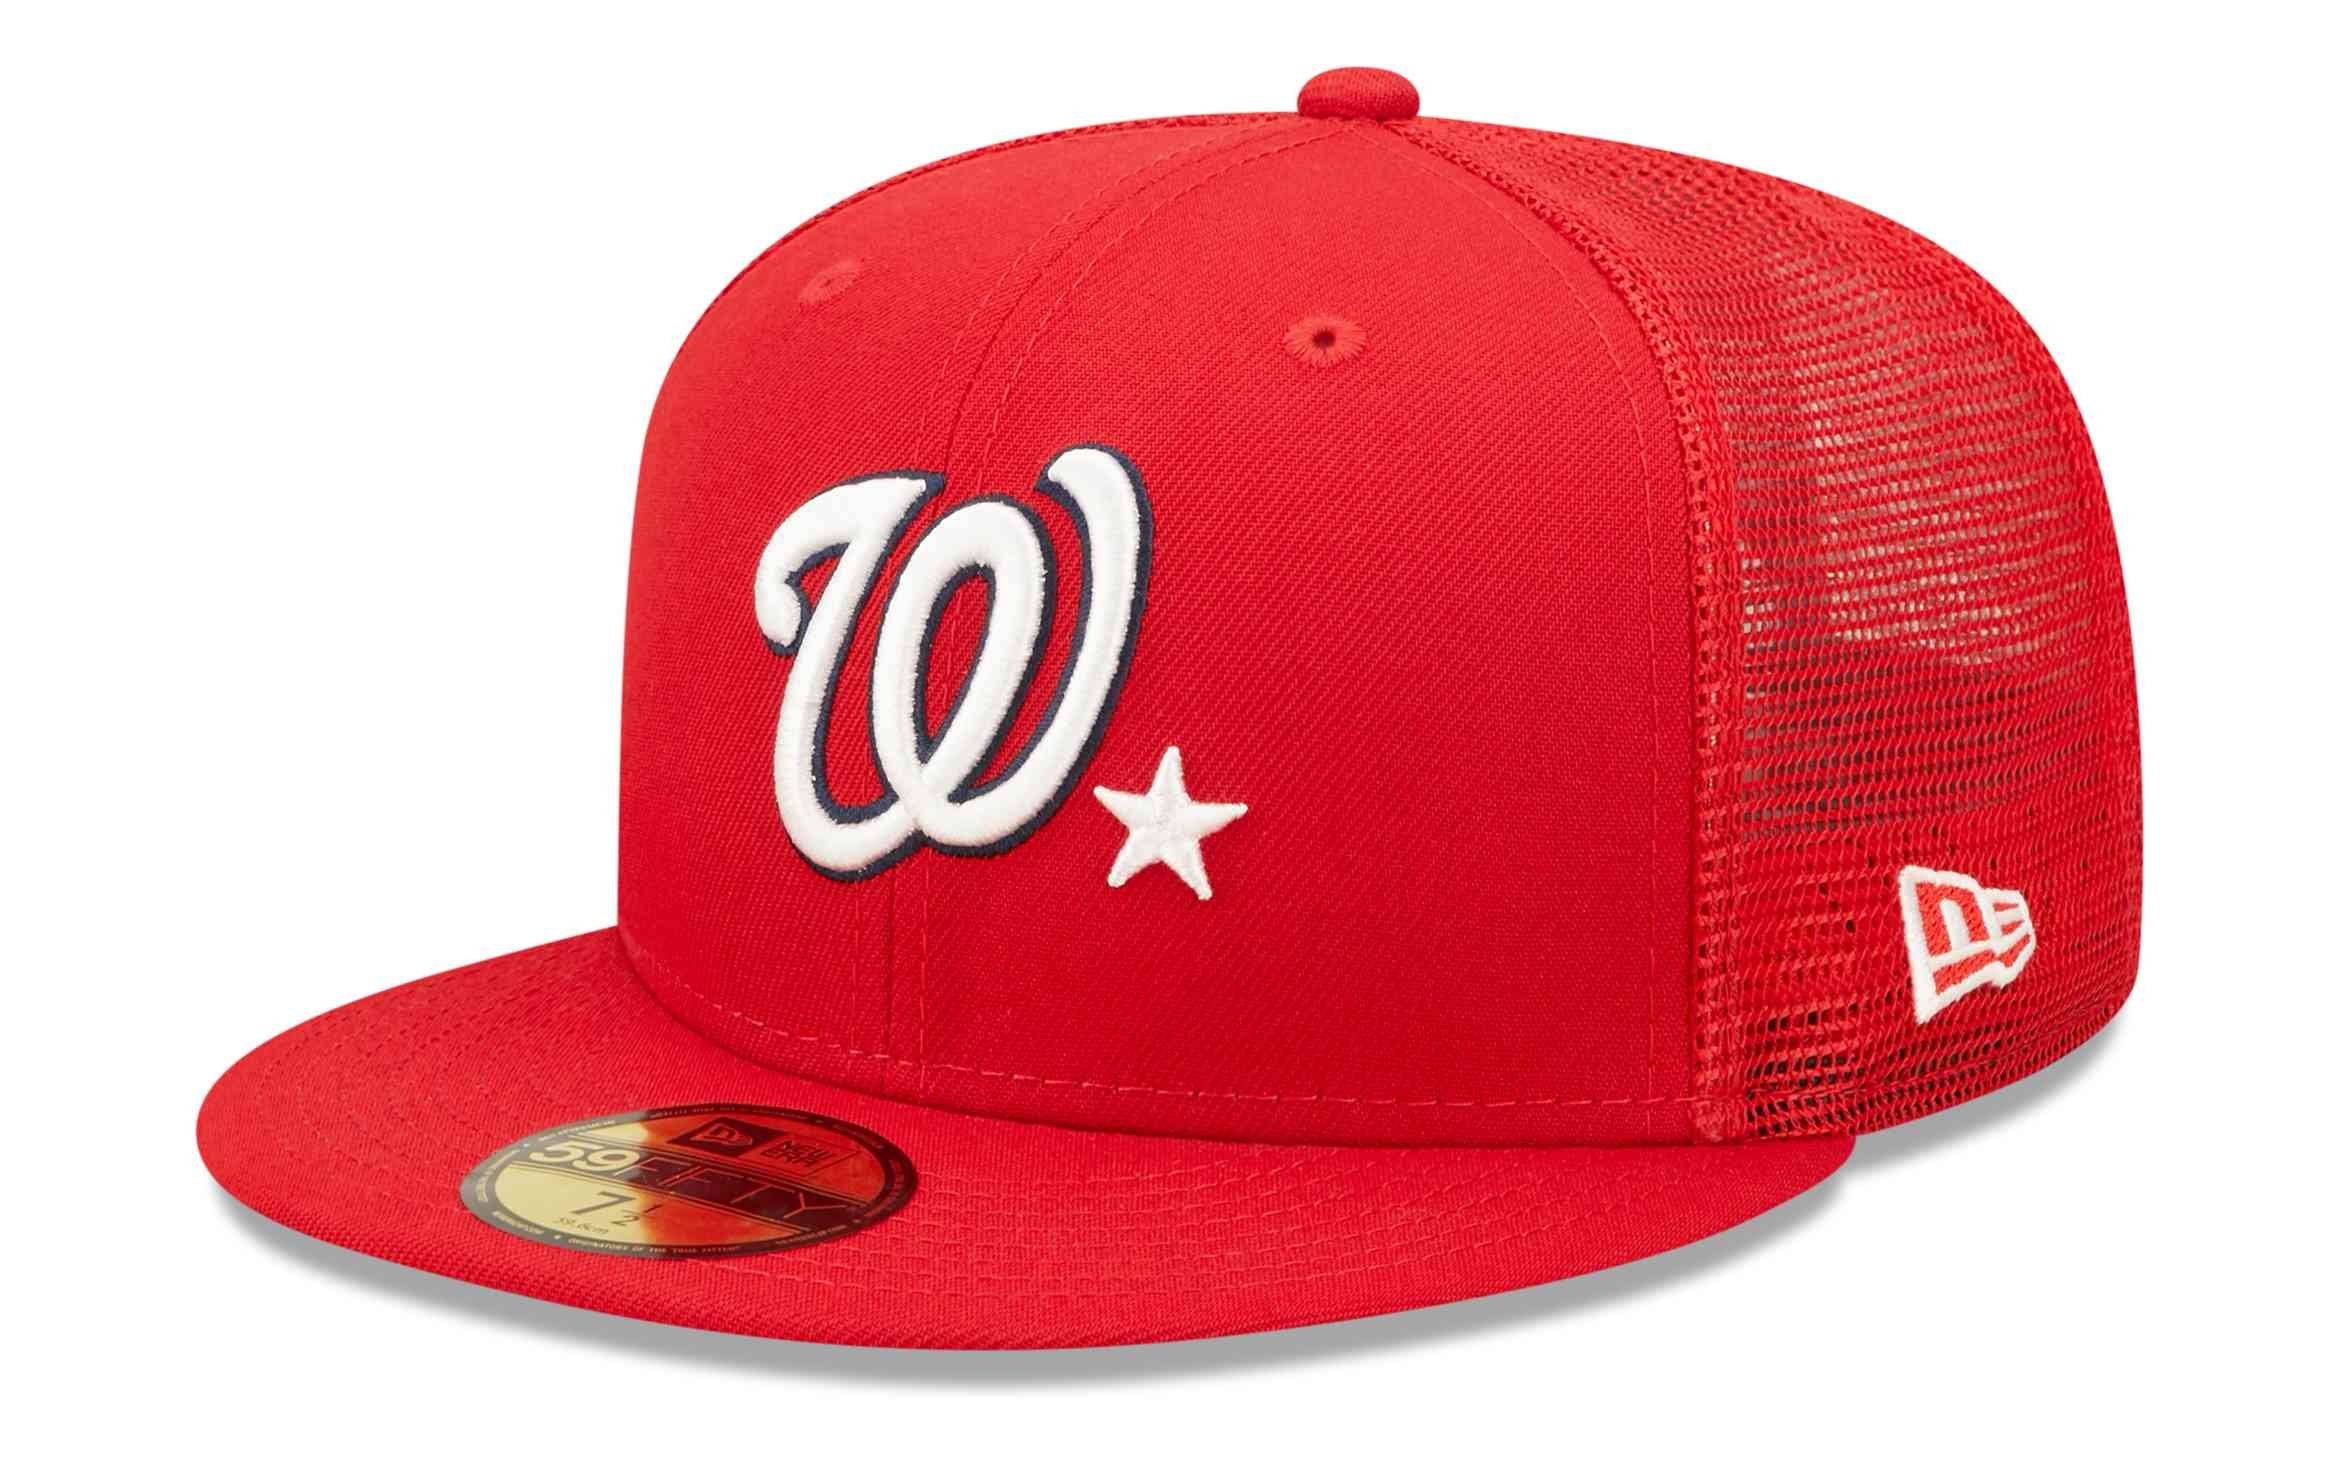 Nationals Star 22 New Game Washington Cap All MLB Fitted 59Fifty Era